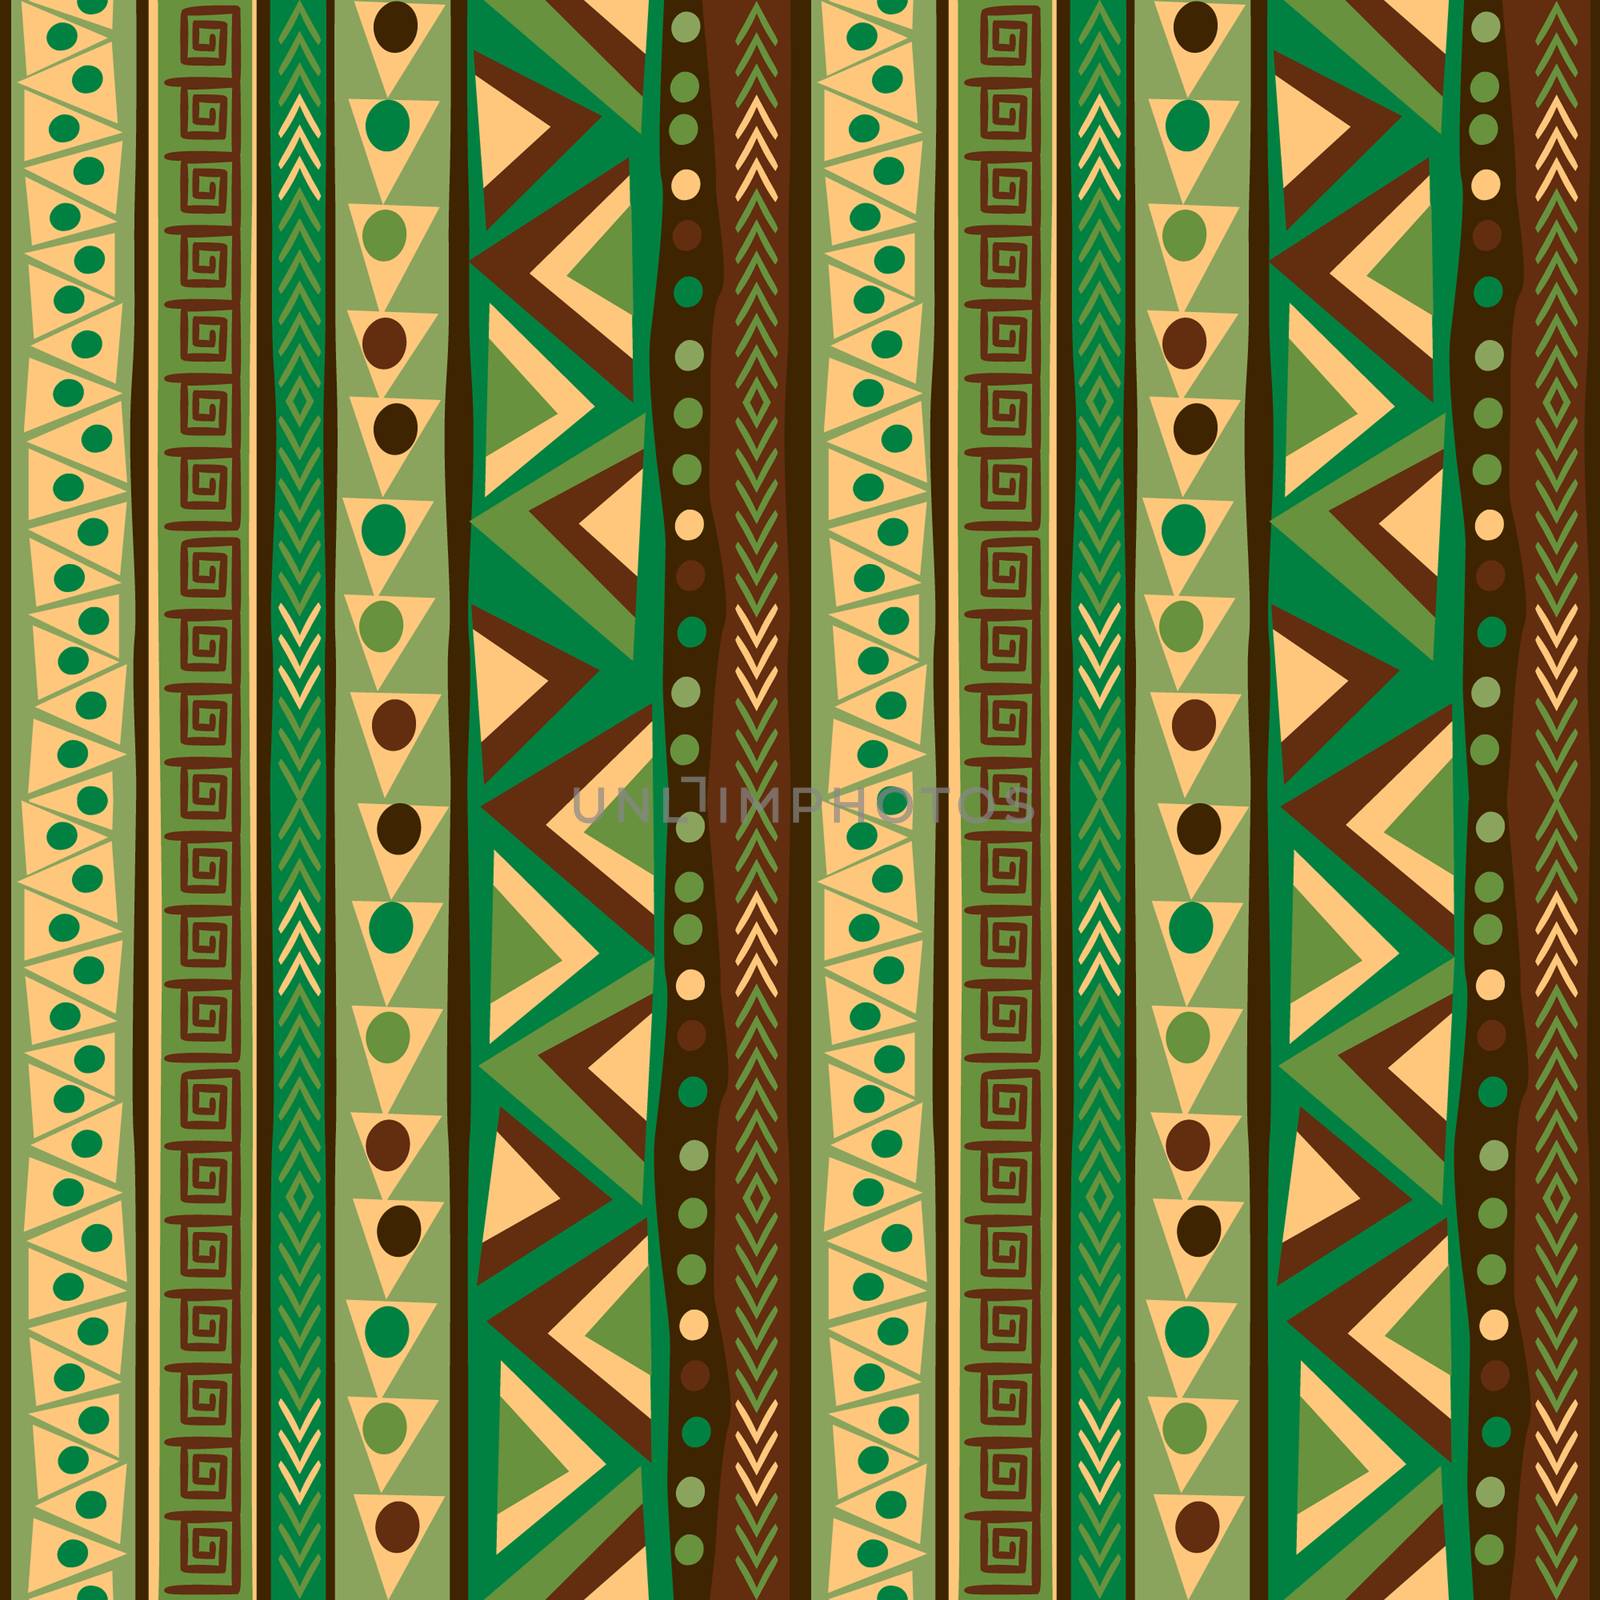 Pattern with vertical ethnic motifs by hibrida13